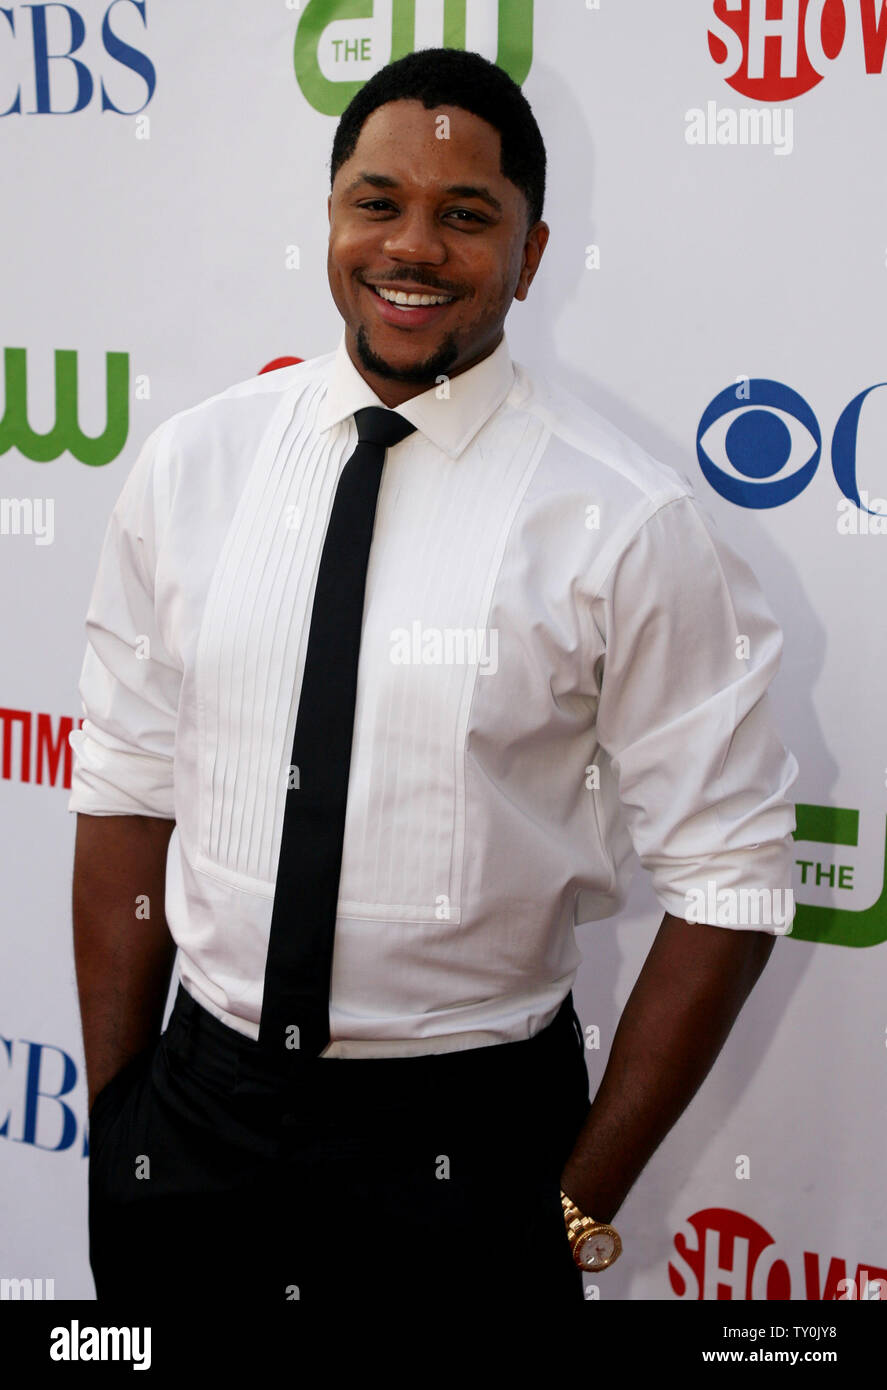 Actor Hosea Chanchez attends the CBS, CW and Showtime press tour party in L...